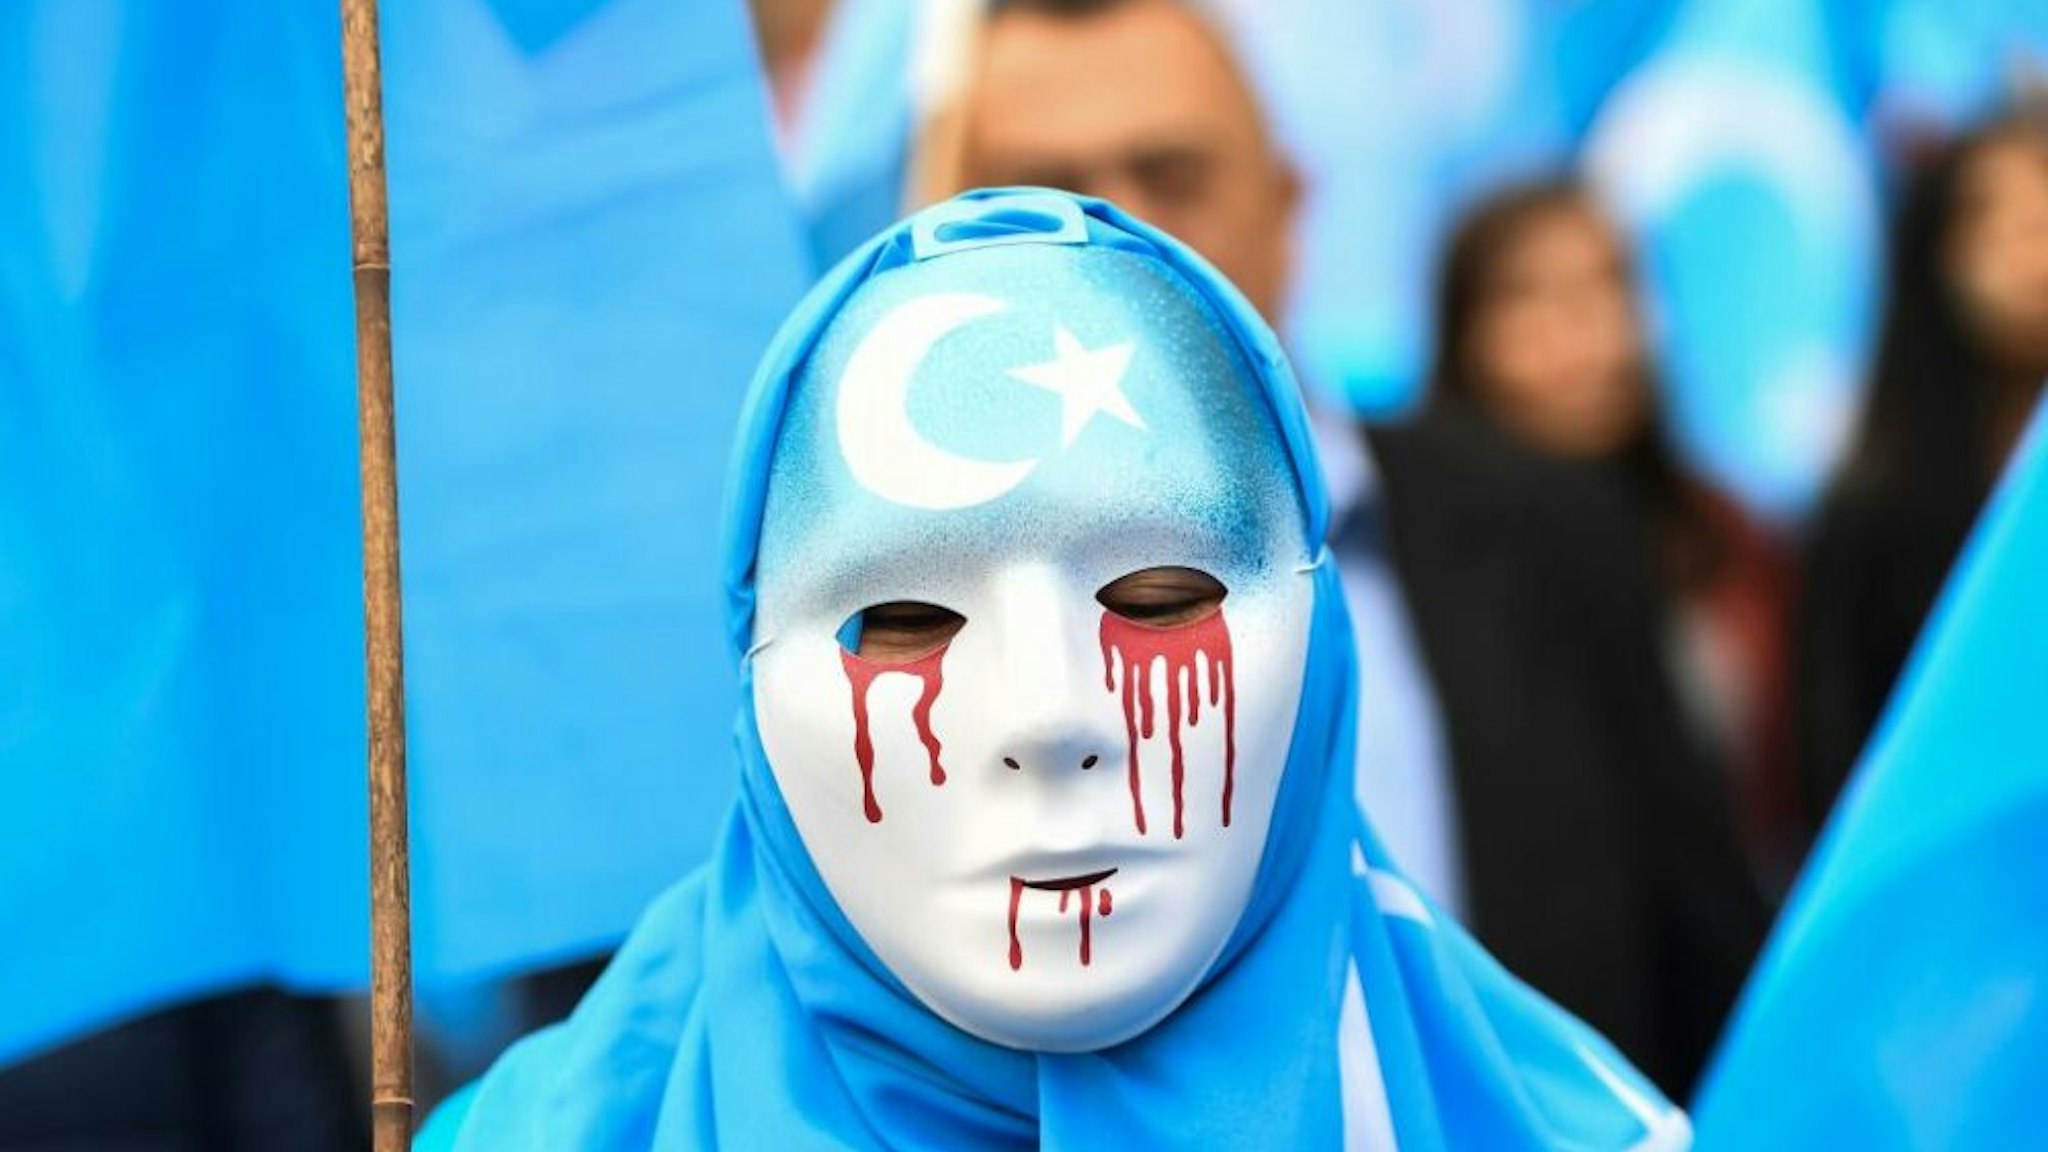 TOPSHOT - A person wearing a white mask with tears of blood takes part in a protest march of ethnic Uighurs asking for the European Union to call upon China to respect human rights in the Chinese Xinjiang region and ask for the closure of "re-education center" where Uighurs are detained, during a demonstration around the EU institutions in Brussels on April 27, 2018.